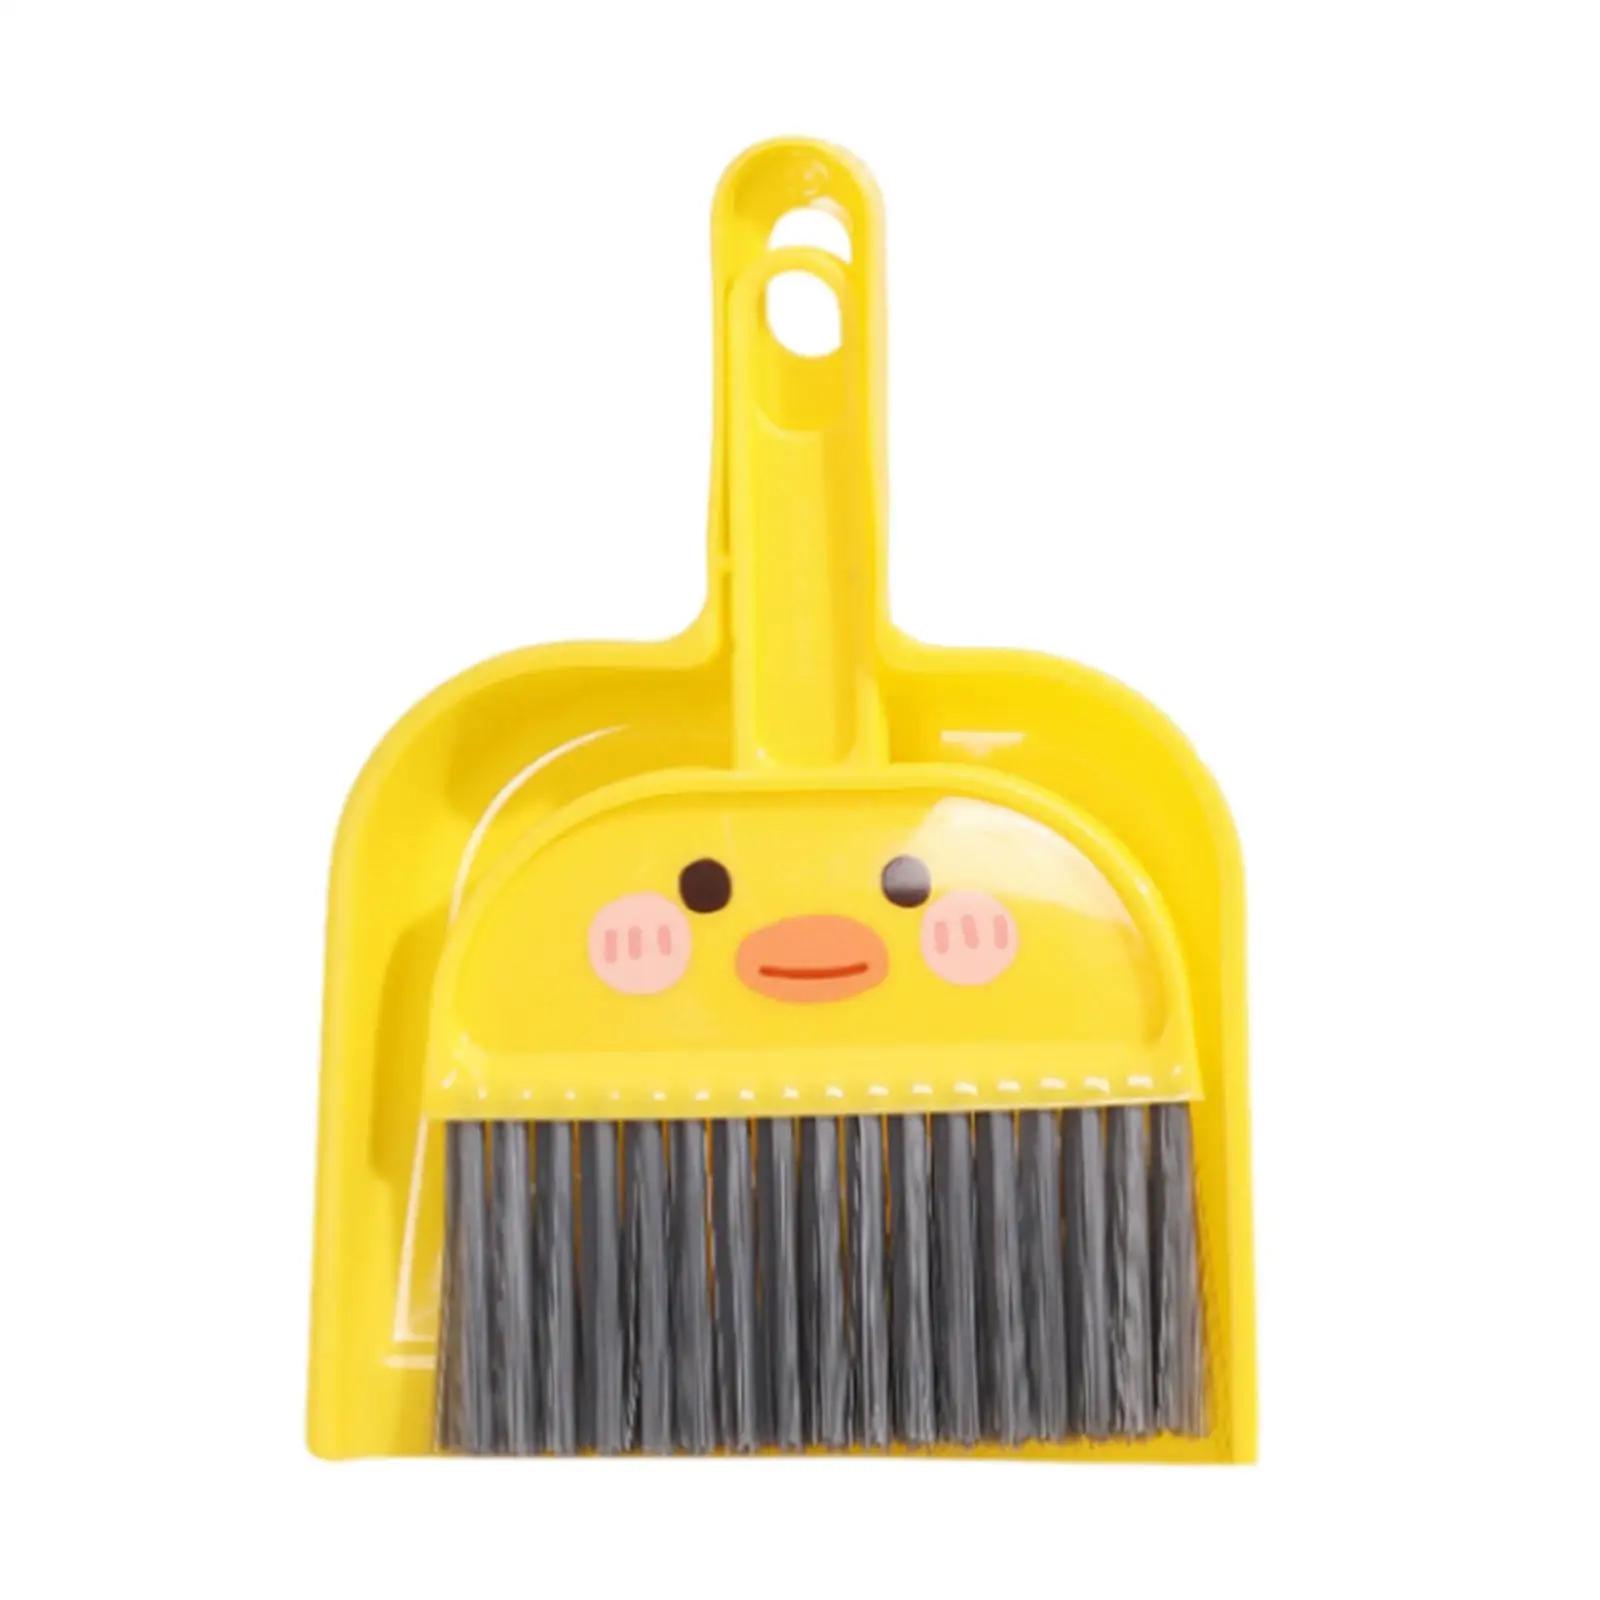 Small Dustpan and Broom Set Collect Dust Pan Combination Housekeeping for Desk Seat Pet Hair Sofa Small Messes